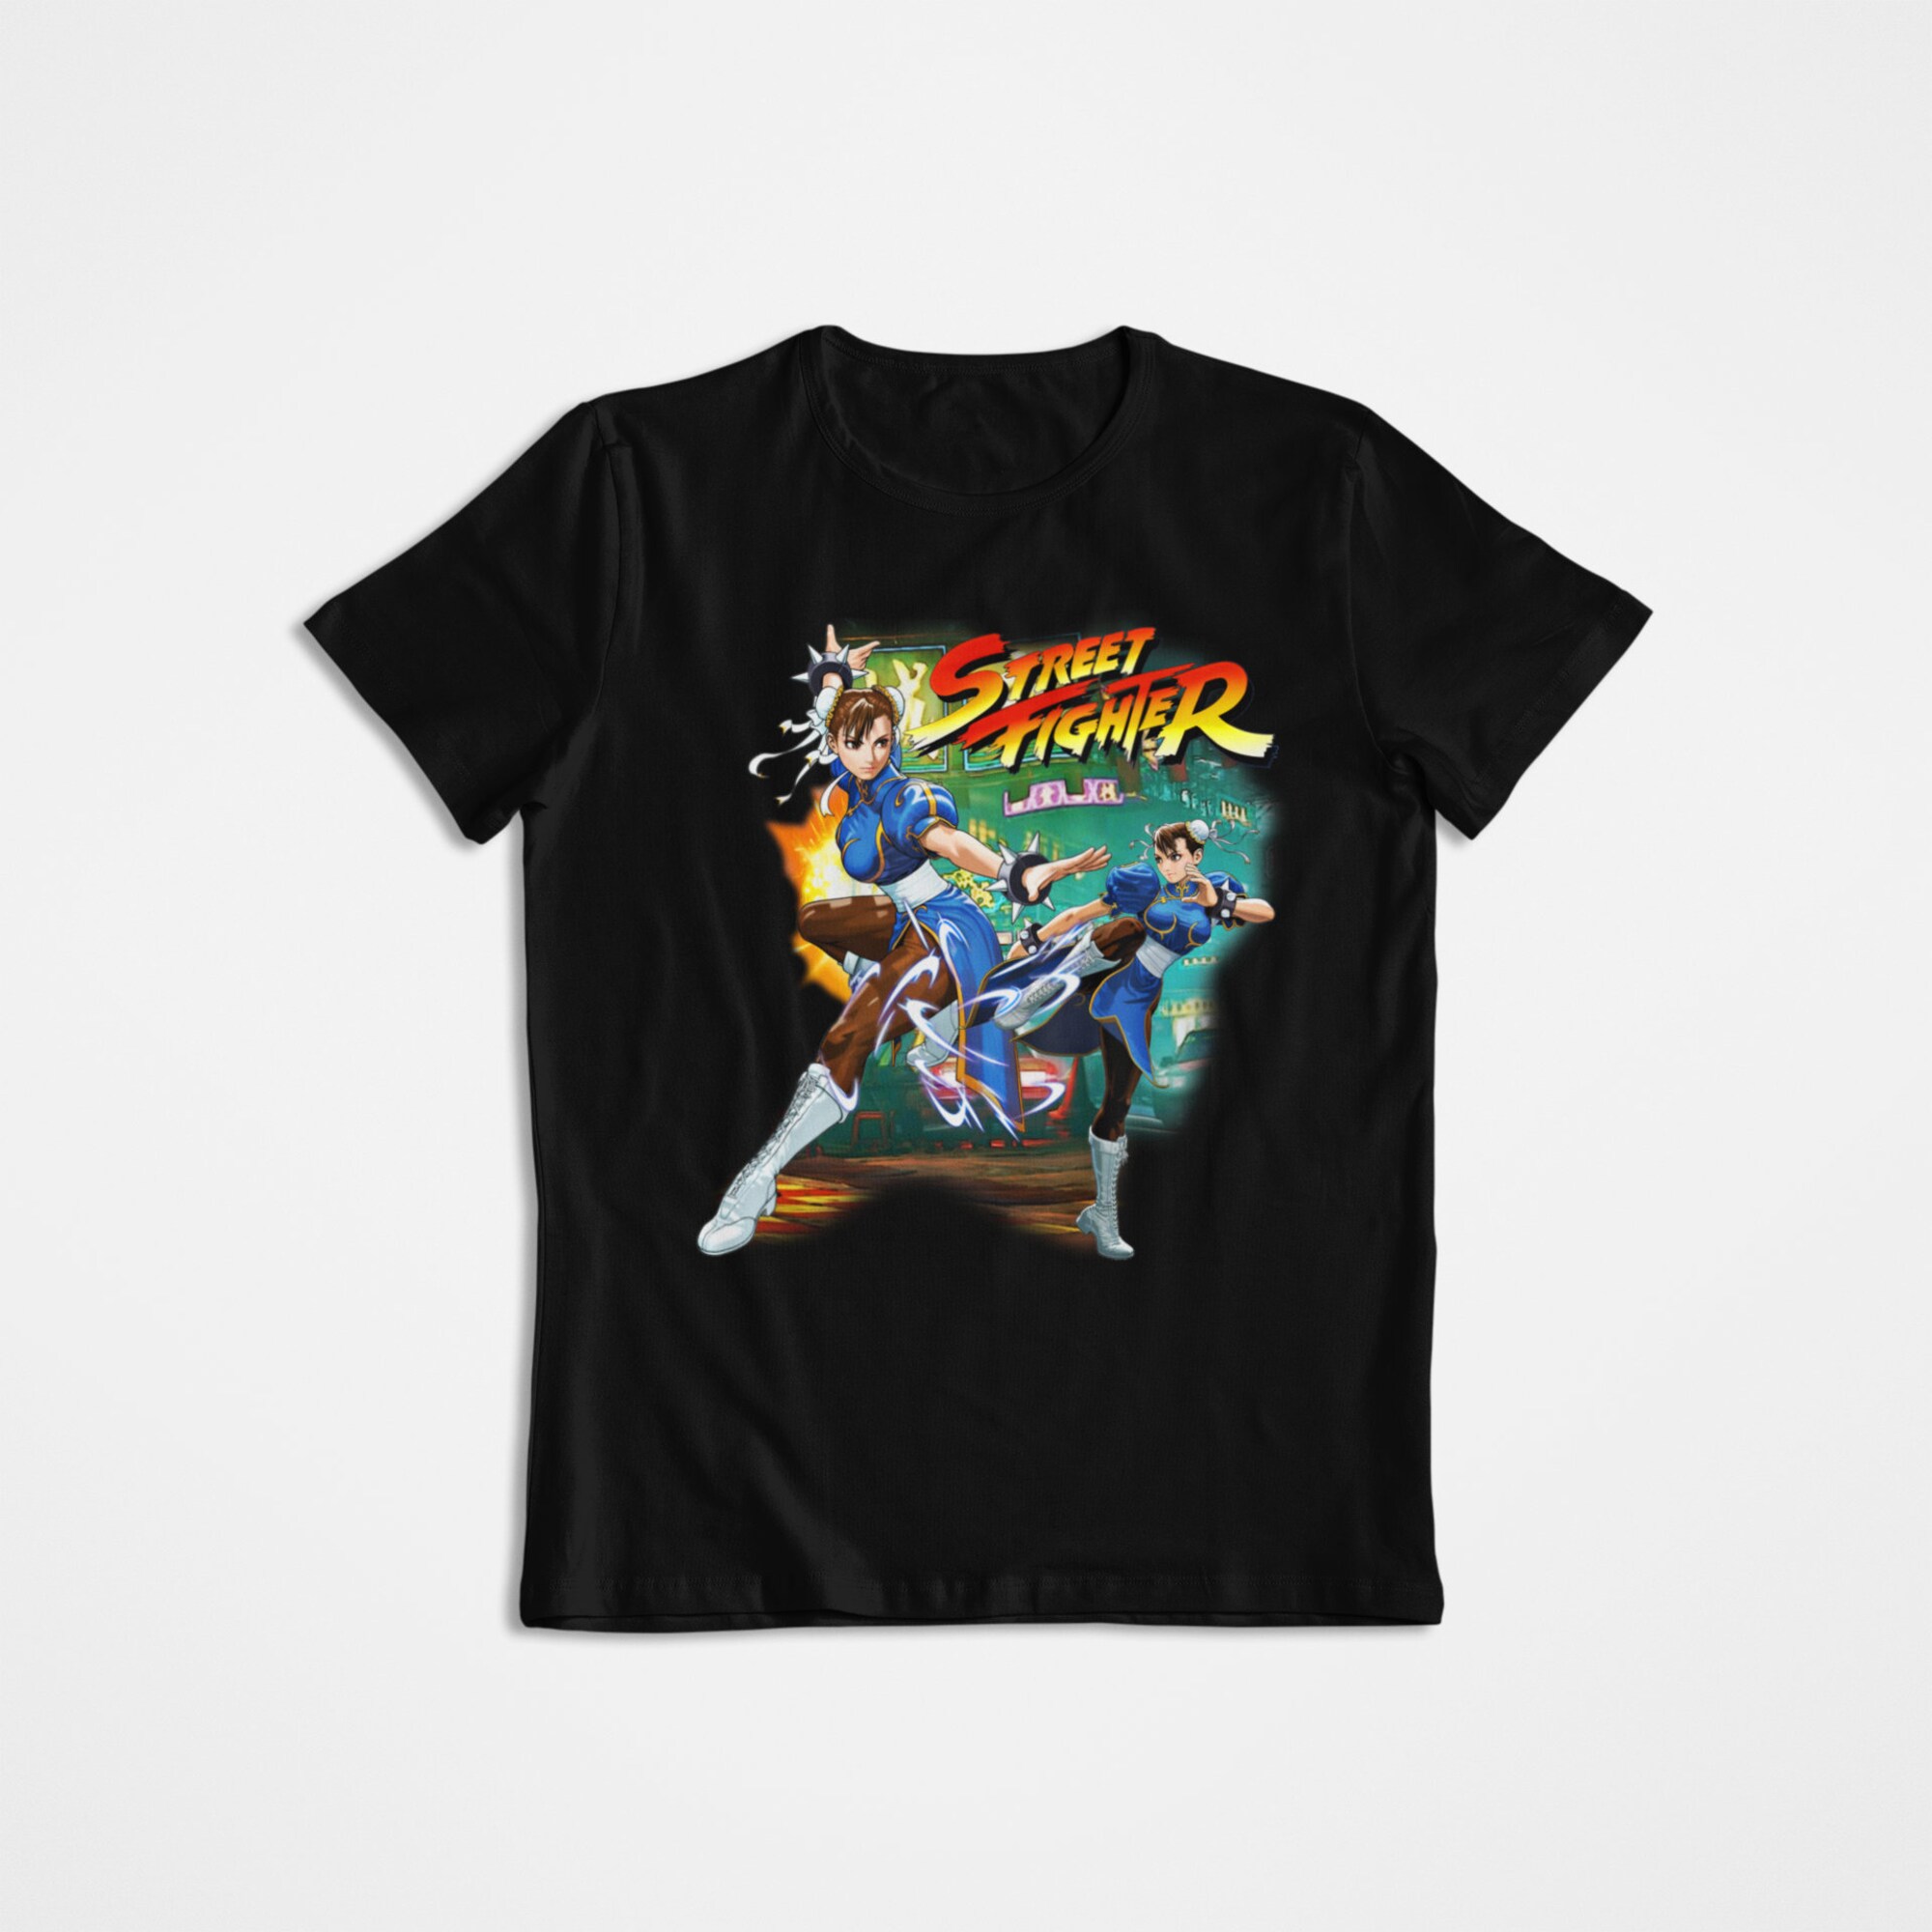 Discover Vintage Graphic T-Shirt, Graphic Tee ~ Street Fighter, Chun Li